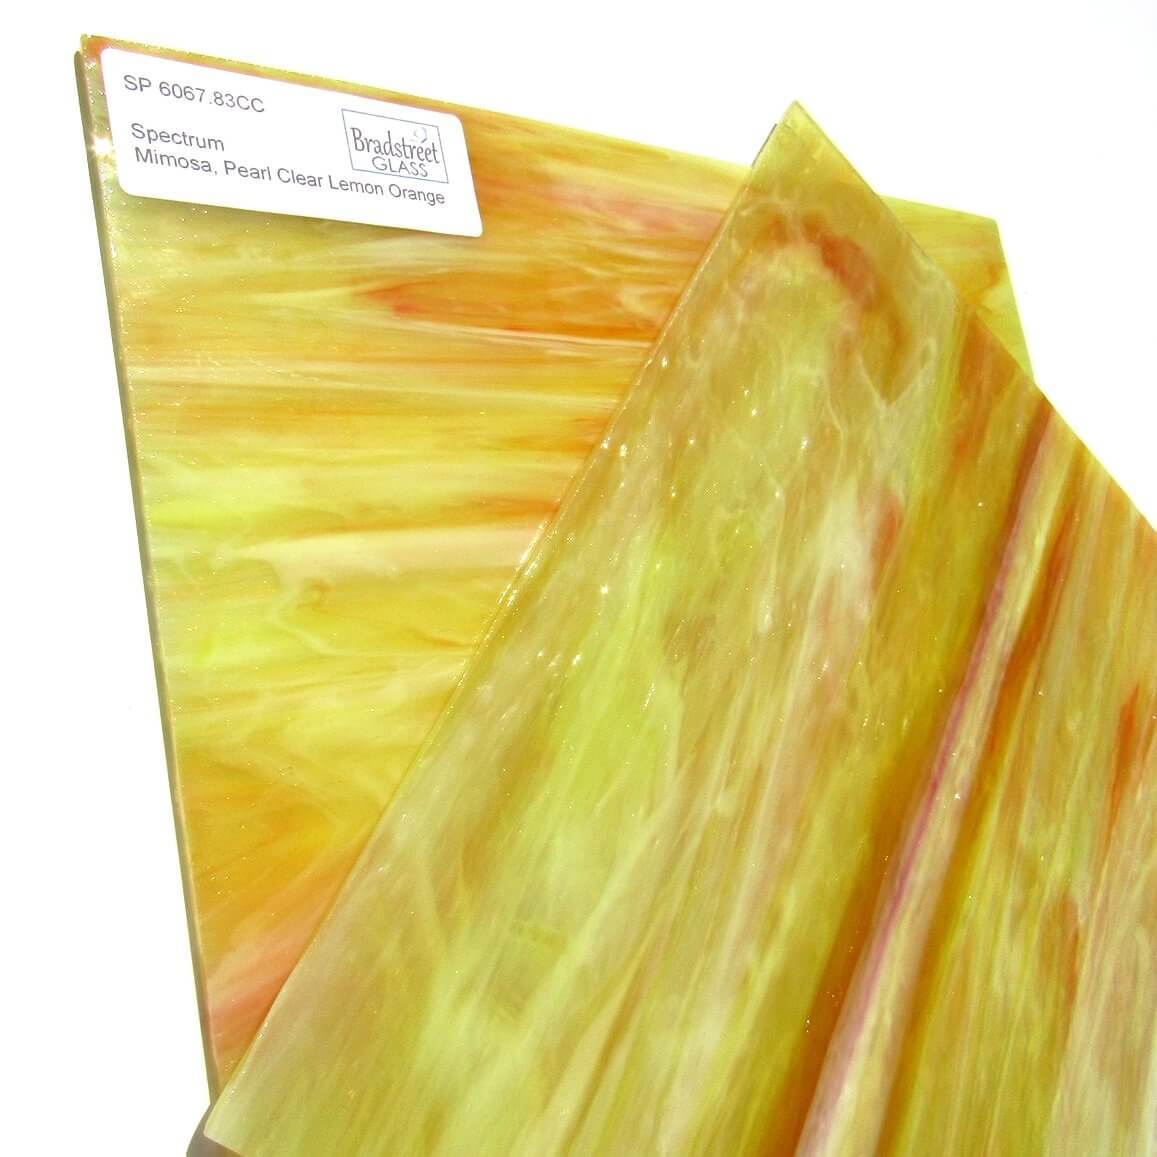 Spectrum 6067.83CC Mimosa Pearl Opal Stained Glass Sheet Opaque Ripple Textured Pearl Clear Lemon Orange 